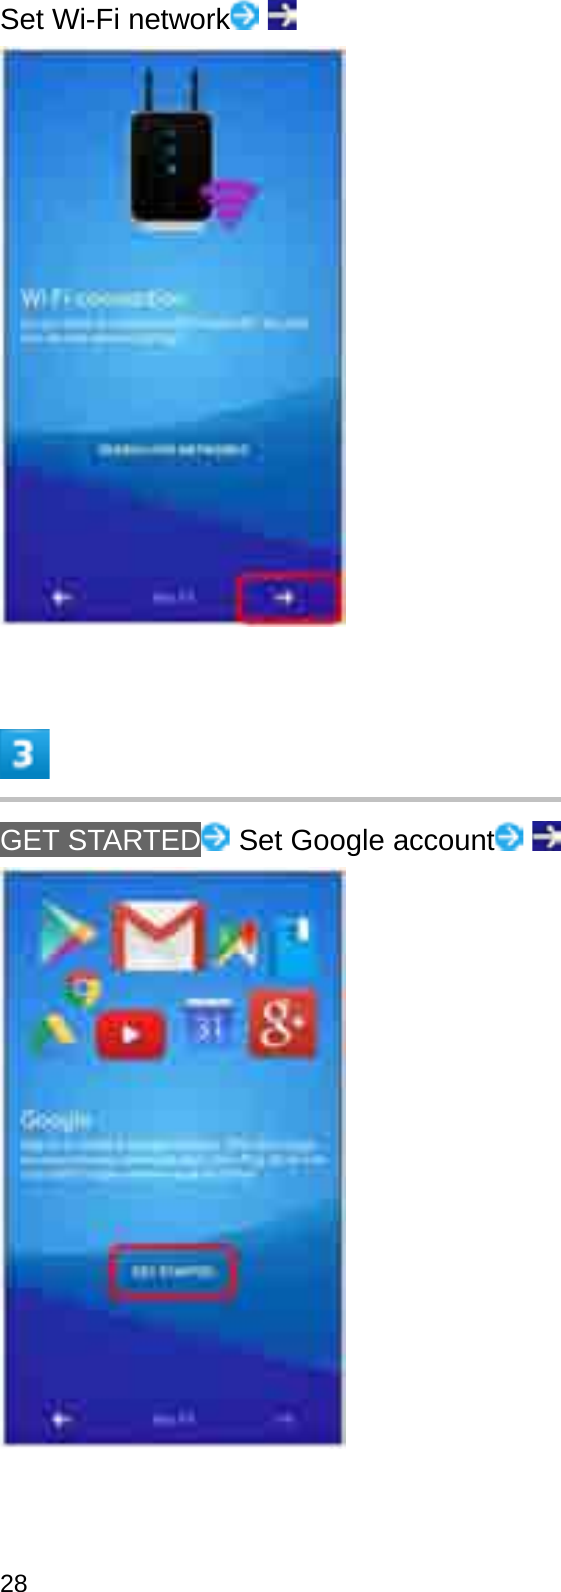 Set Wi-Fi networkGET STARTED Set Google account28